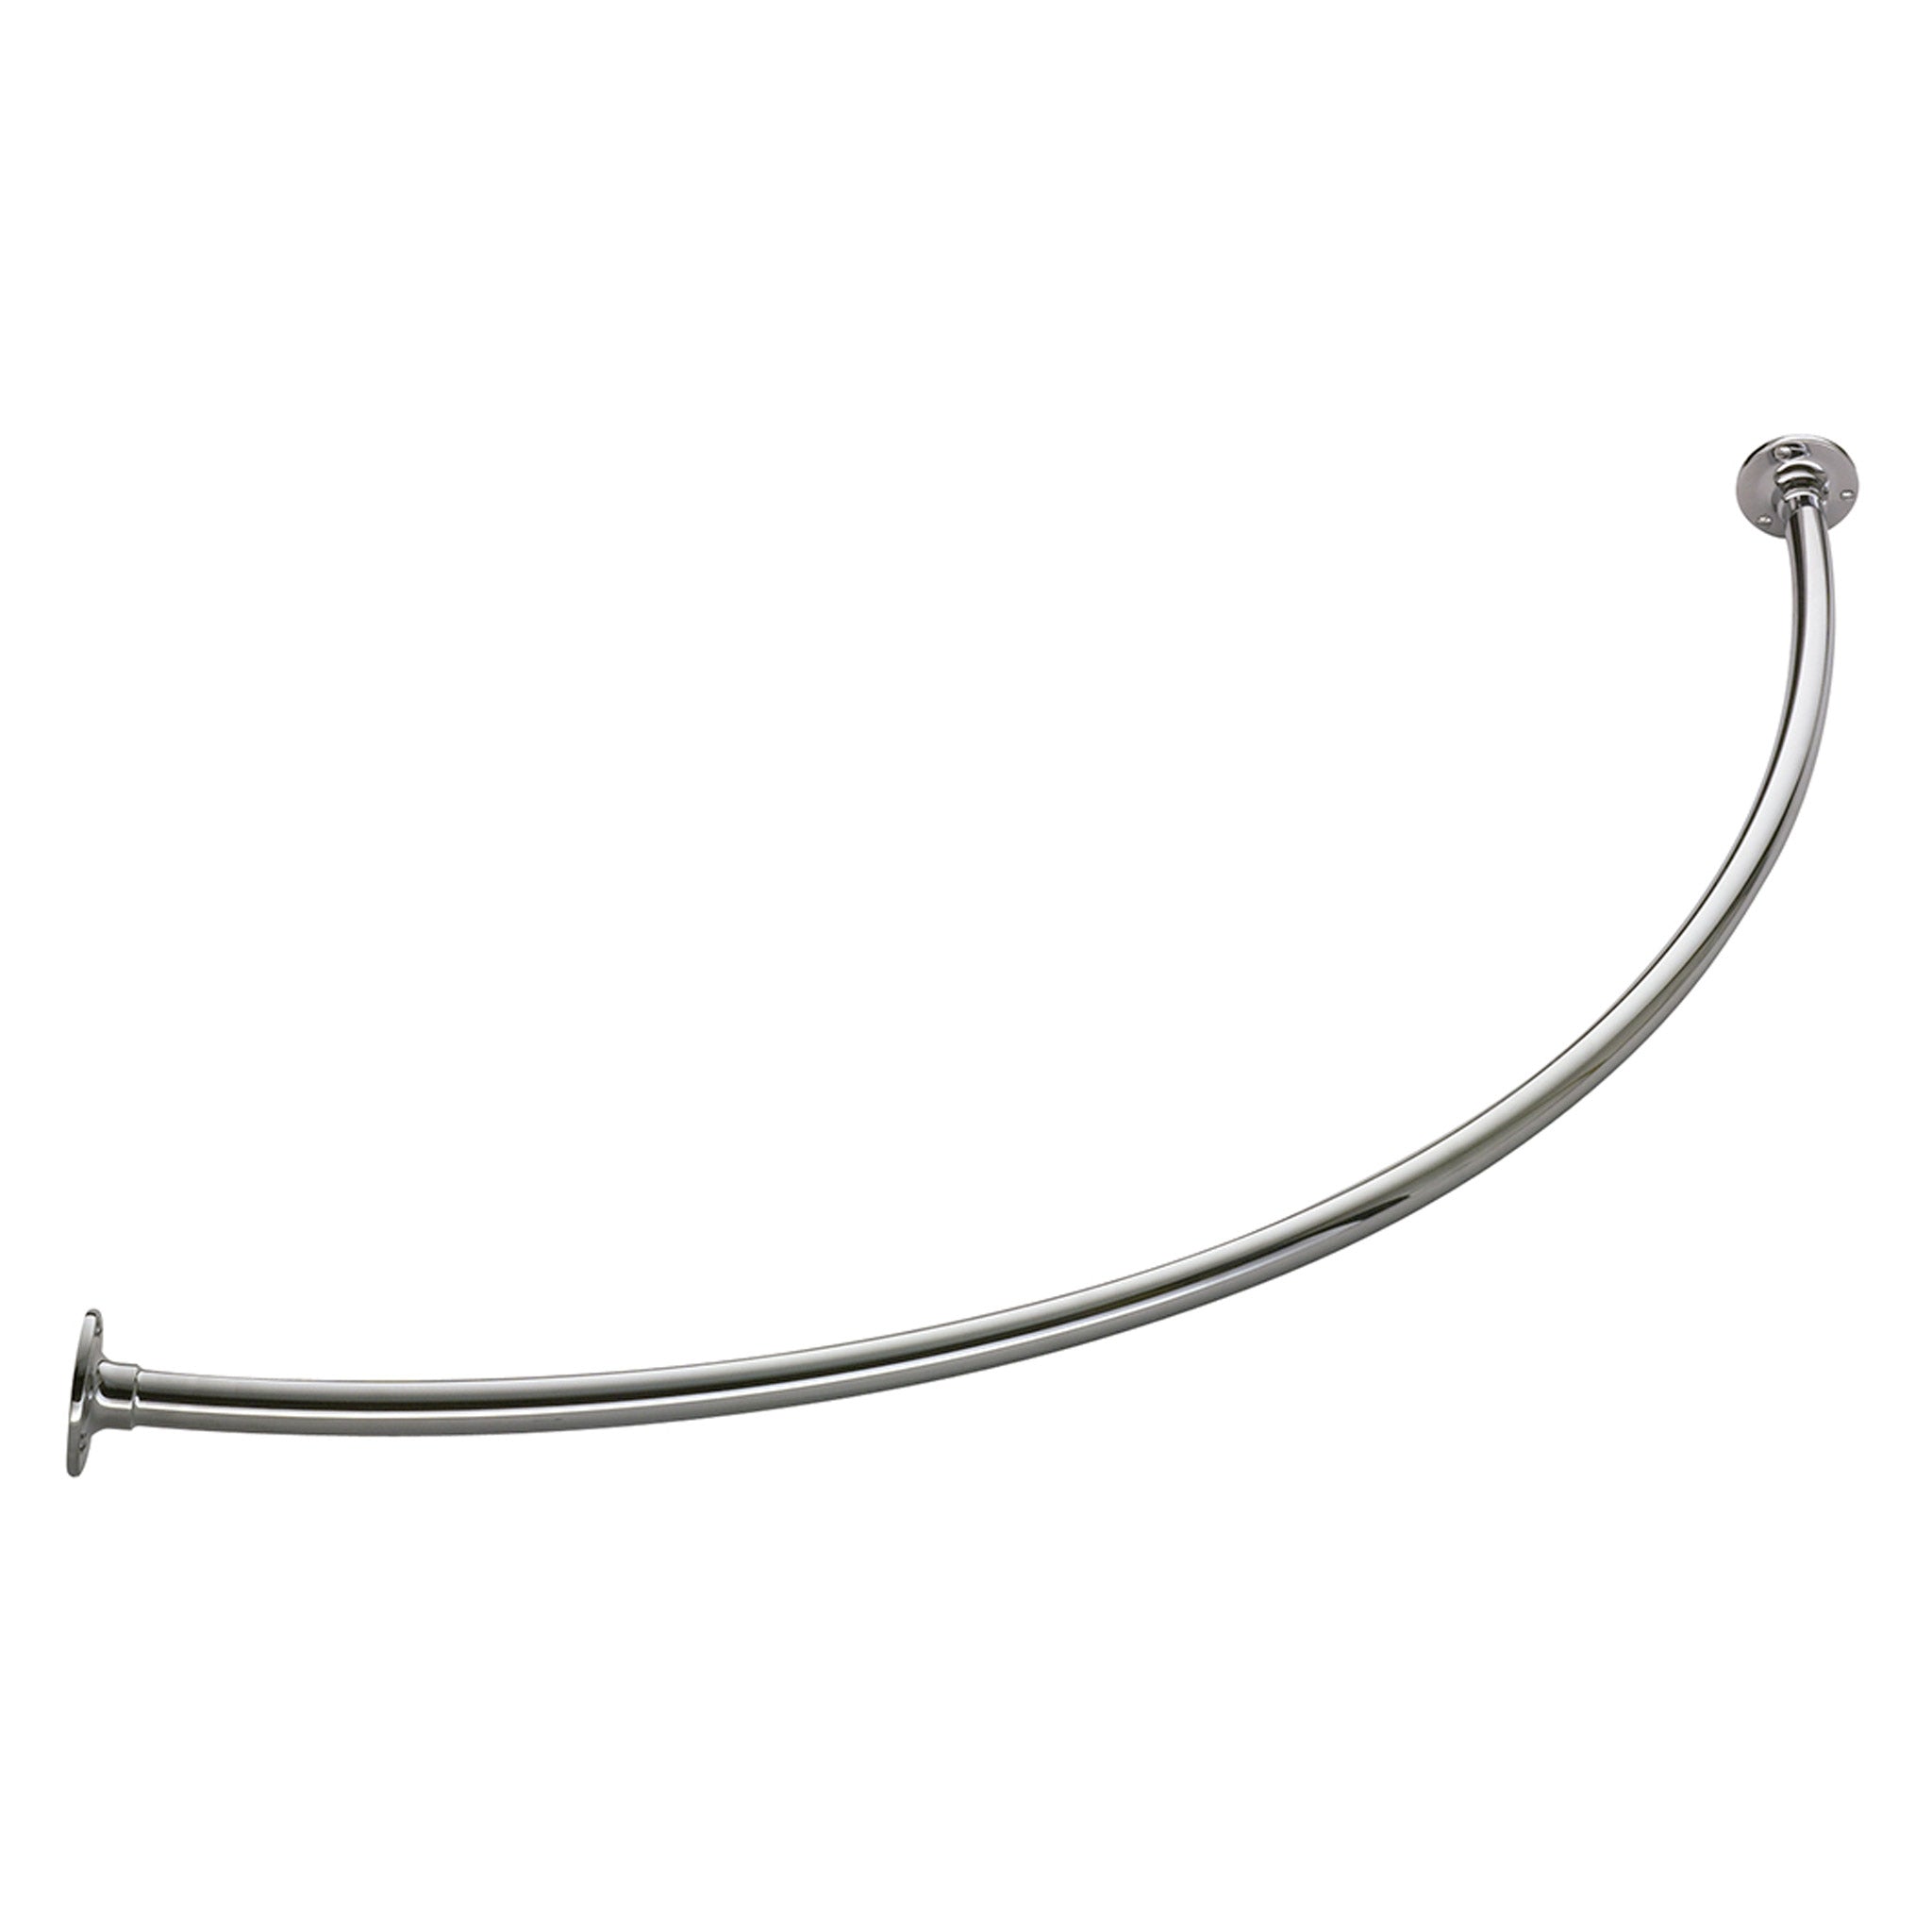 Vogue Shower Curtain Rail Curved Corner Wall Mounted Rail